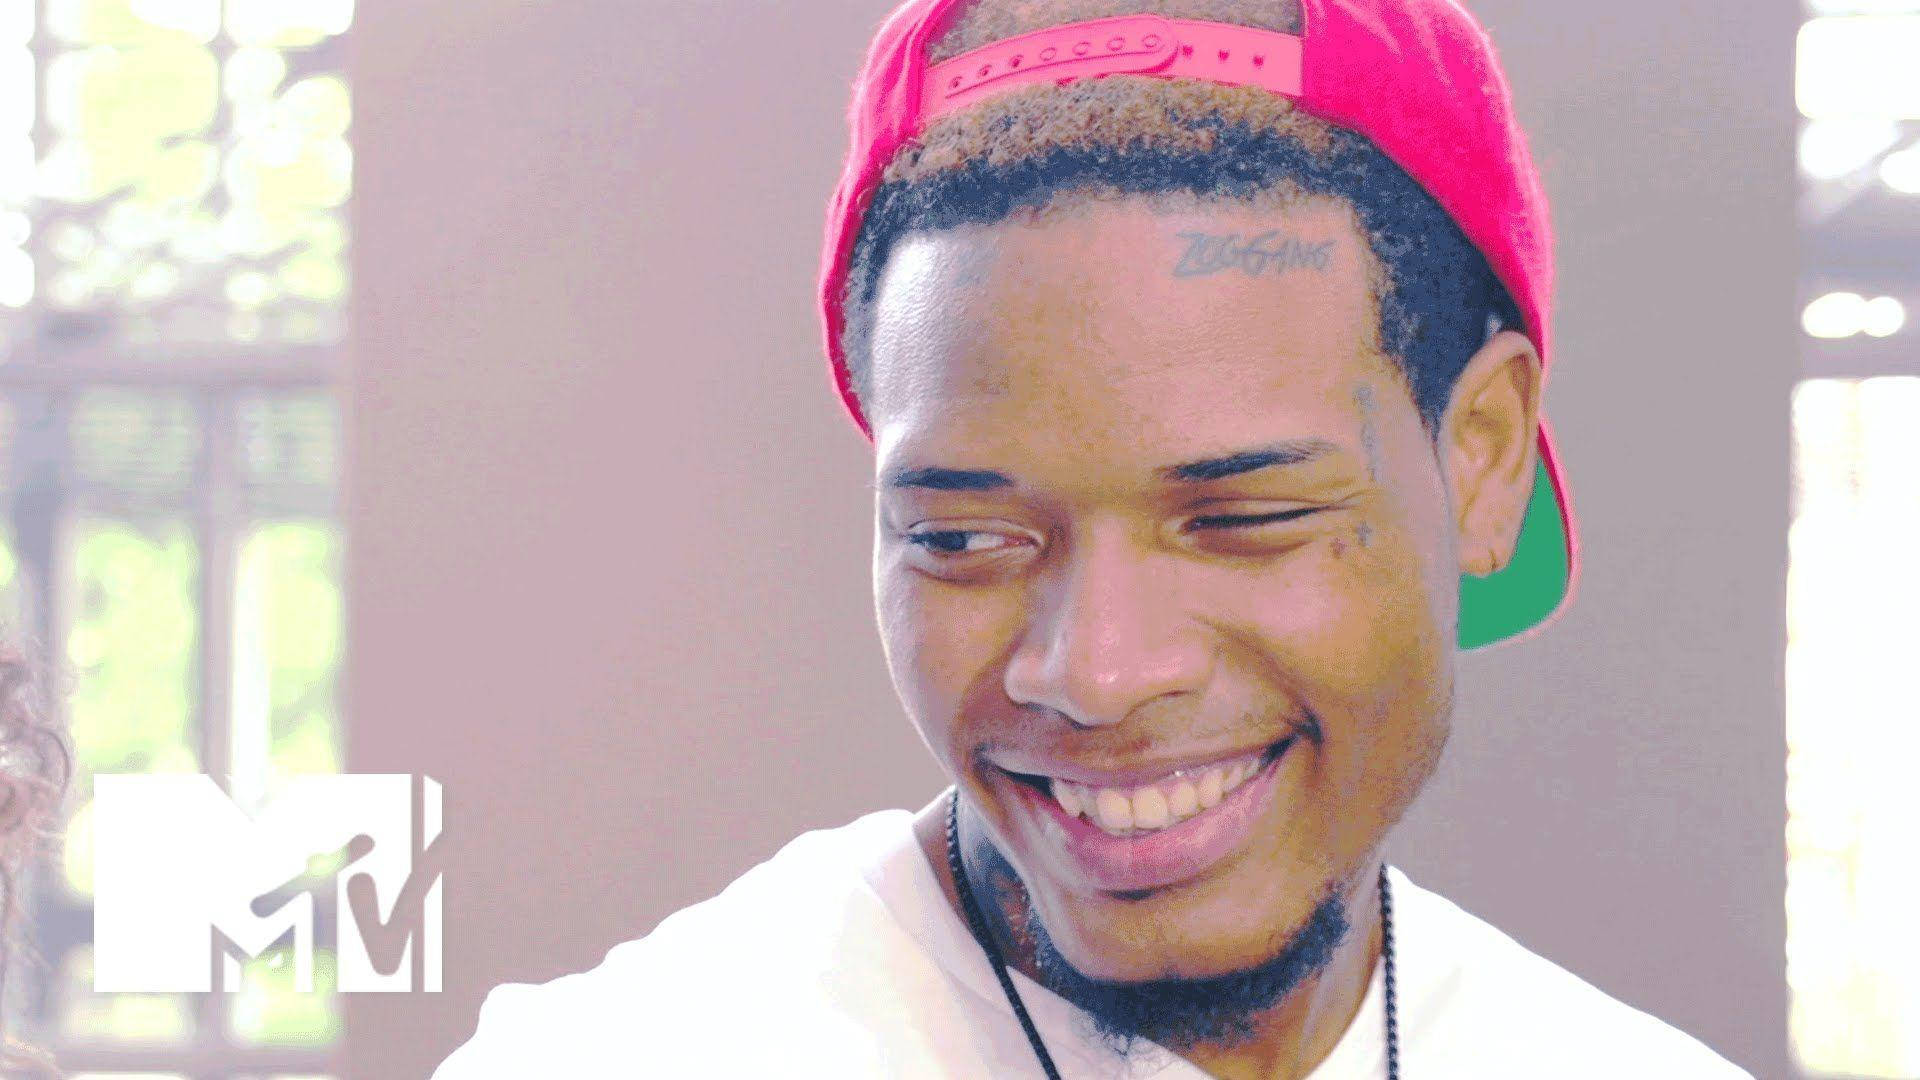 Mtvfetty Wap Is A Popular American Music Artist Who Rose To Fame With Hit Songs Like 